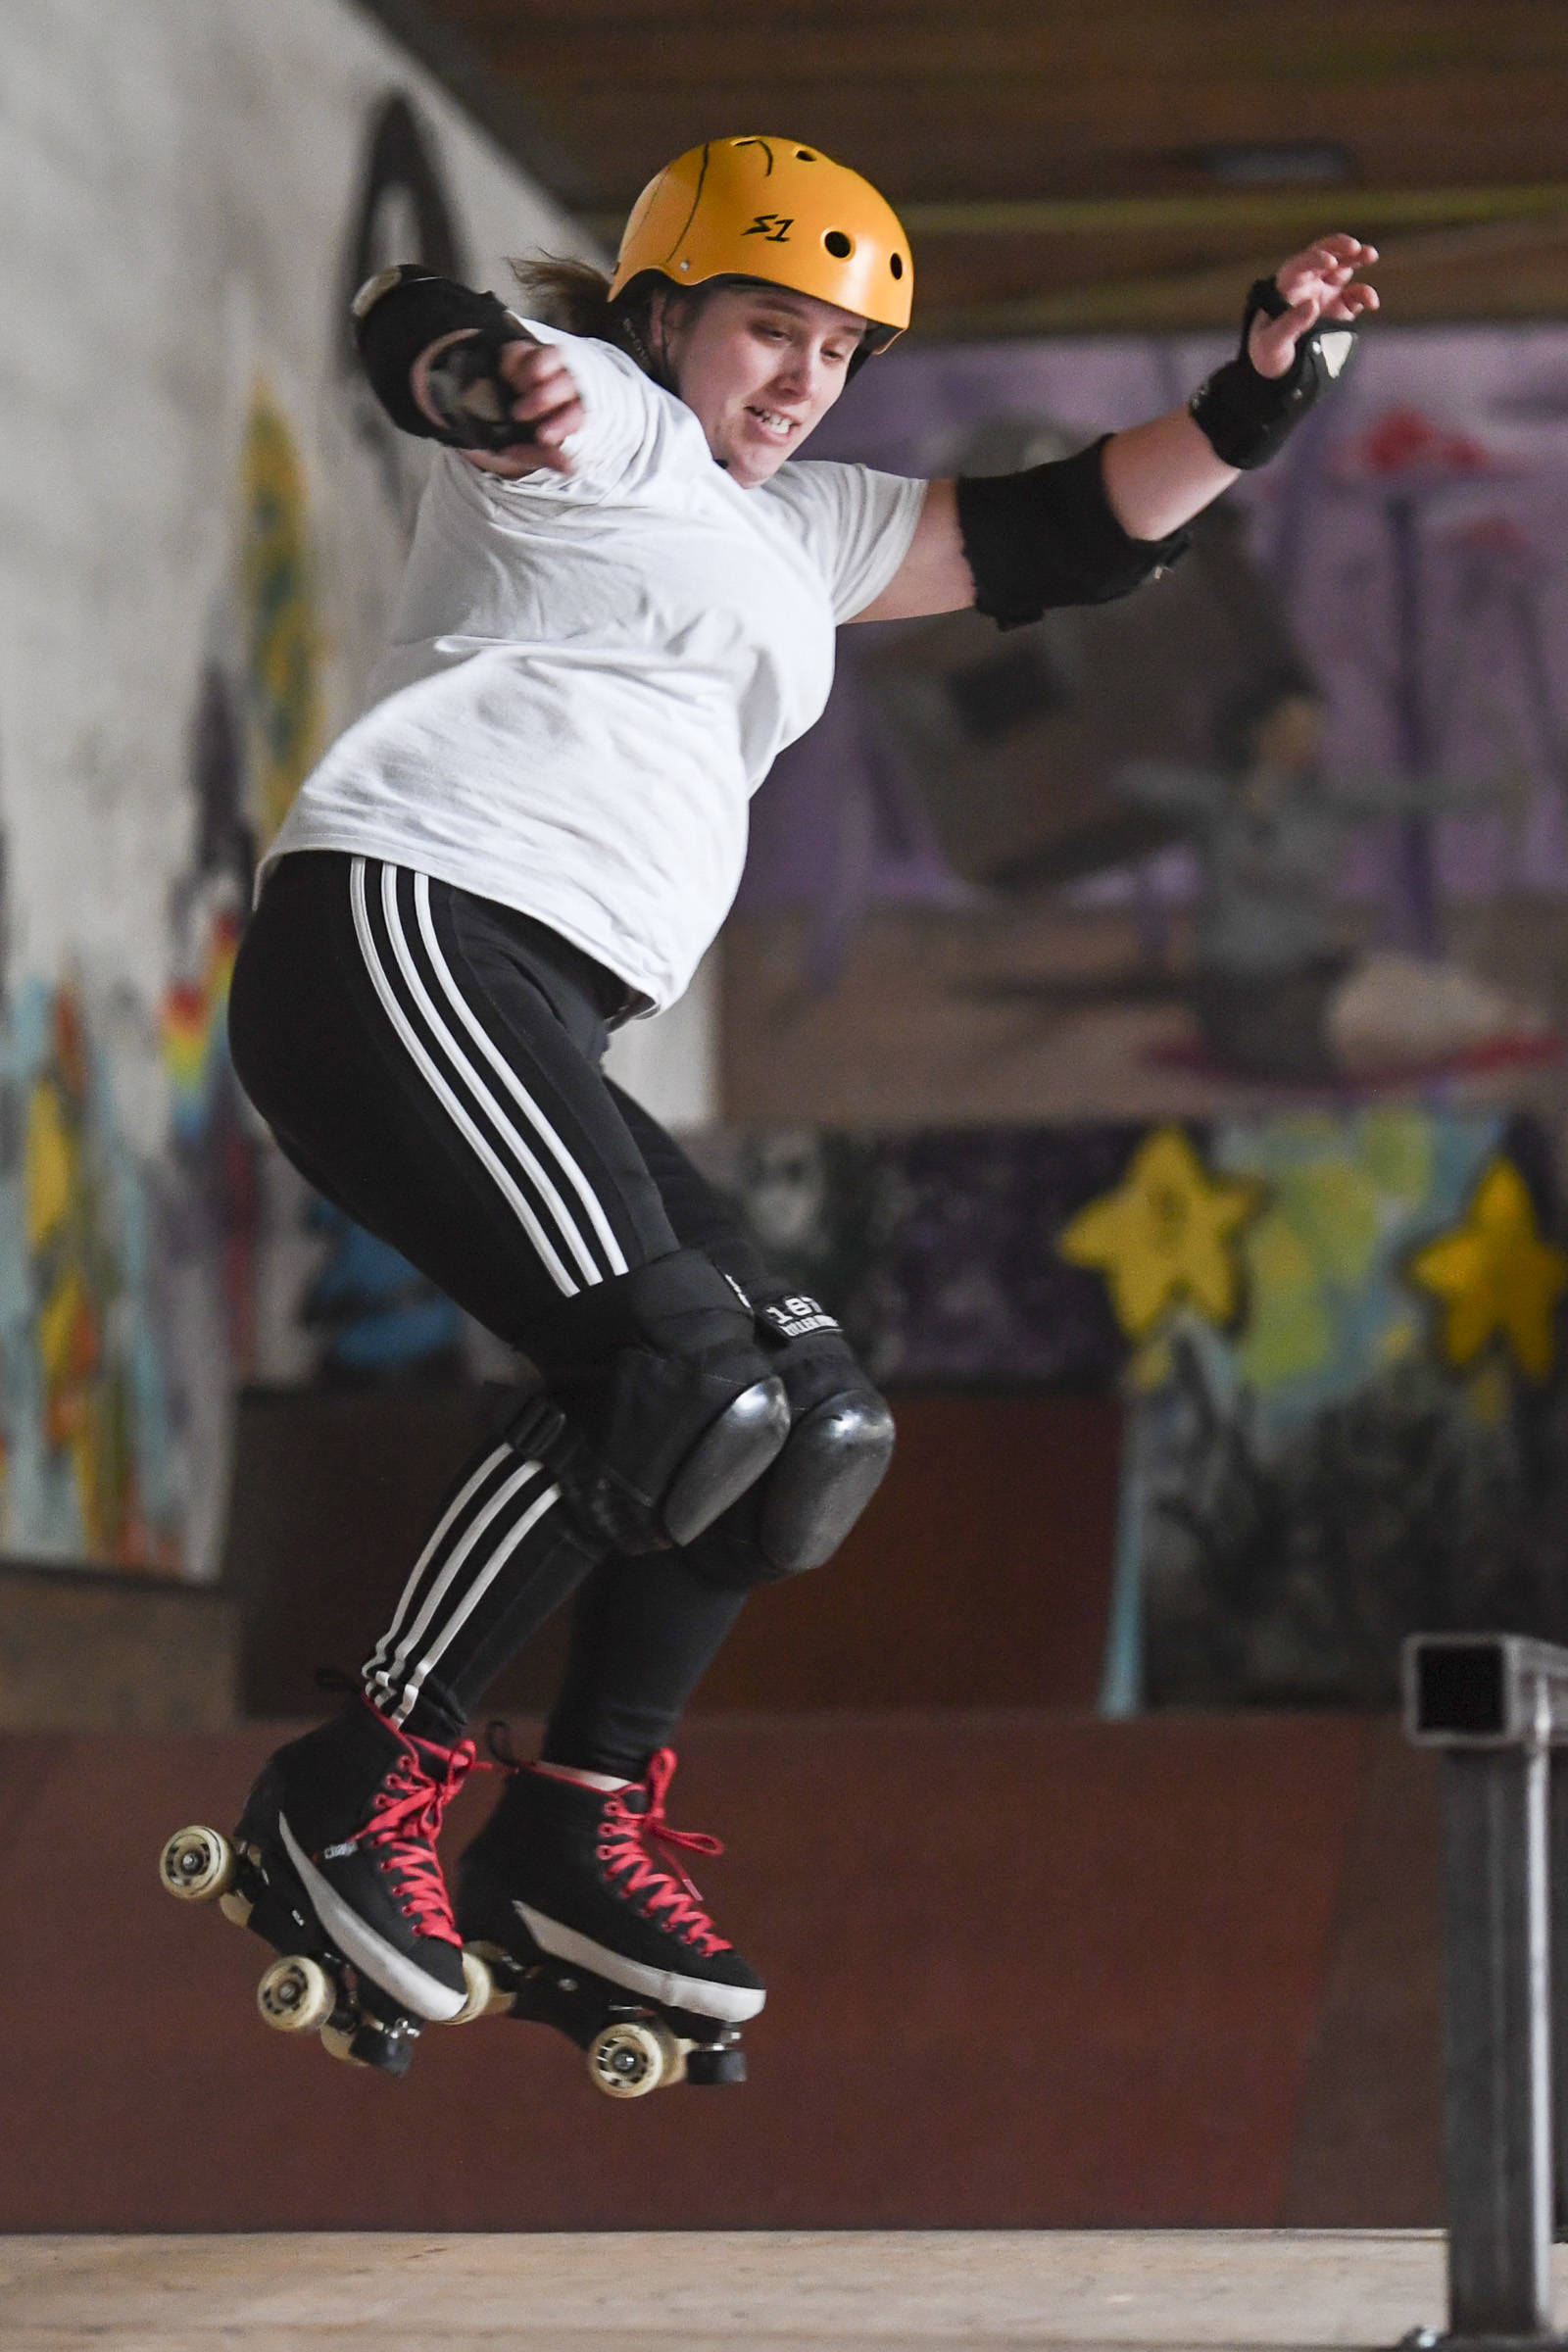 Shabadrang Khalsa, who skates with the Juneau Rollergirls, gets her daily skate in at the Pipeline Skate Park on Friday, Oct. 11, 2019. (Michael Penn | Juneau Empire)